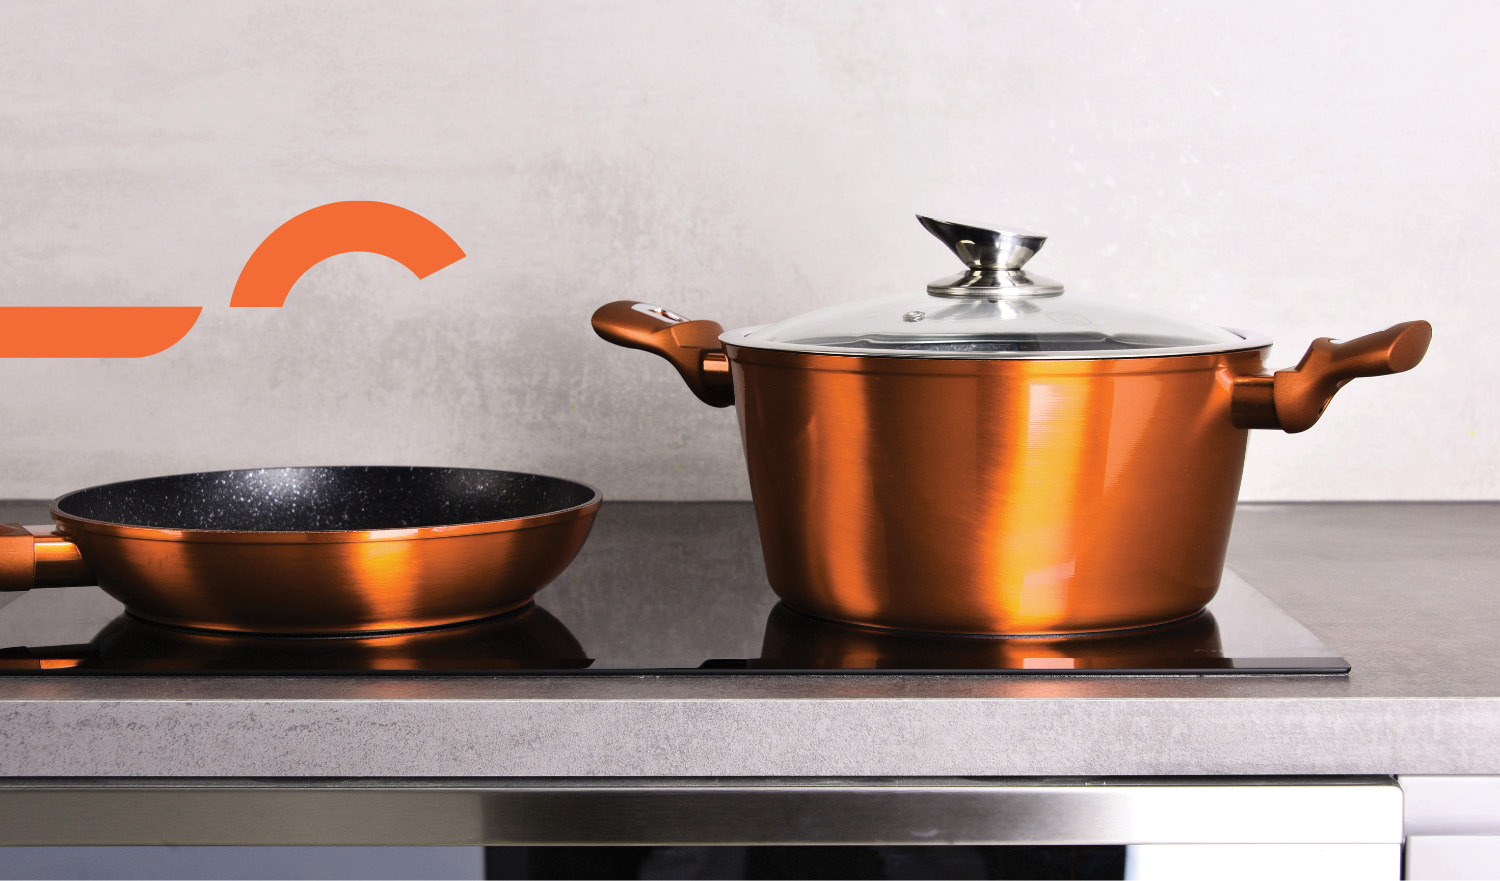 Pots and pans on induction stovetop